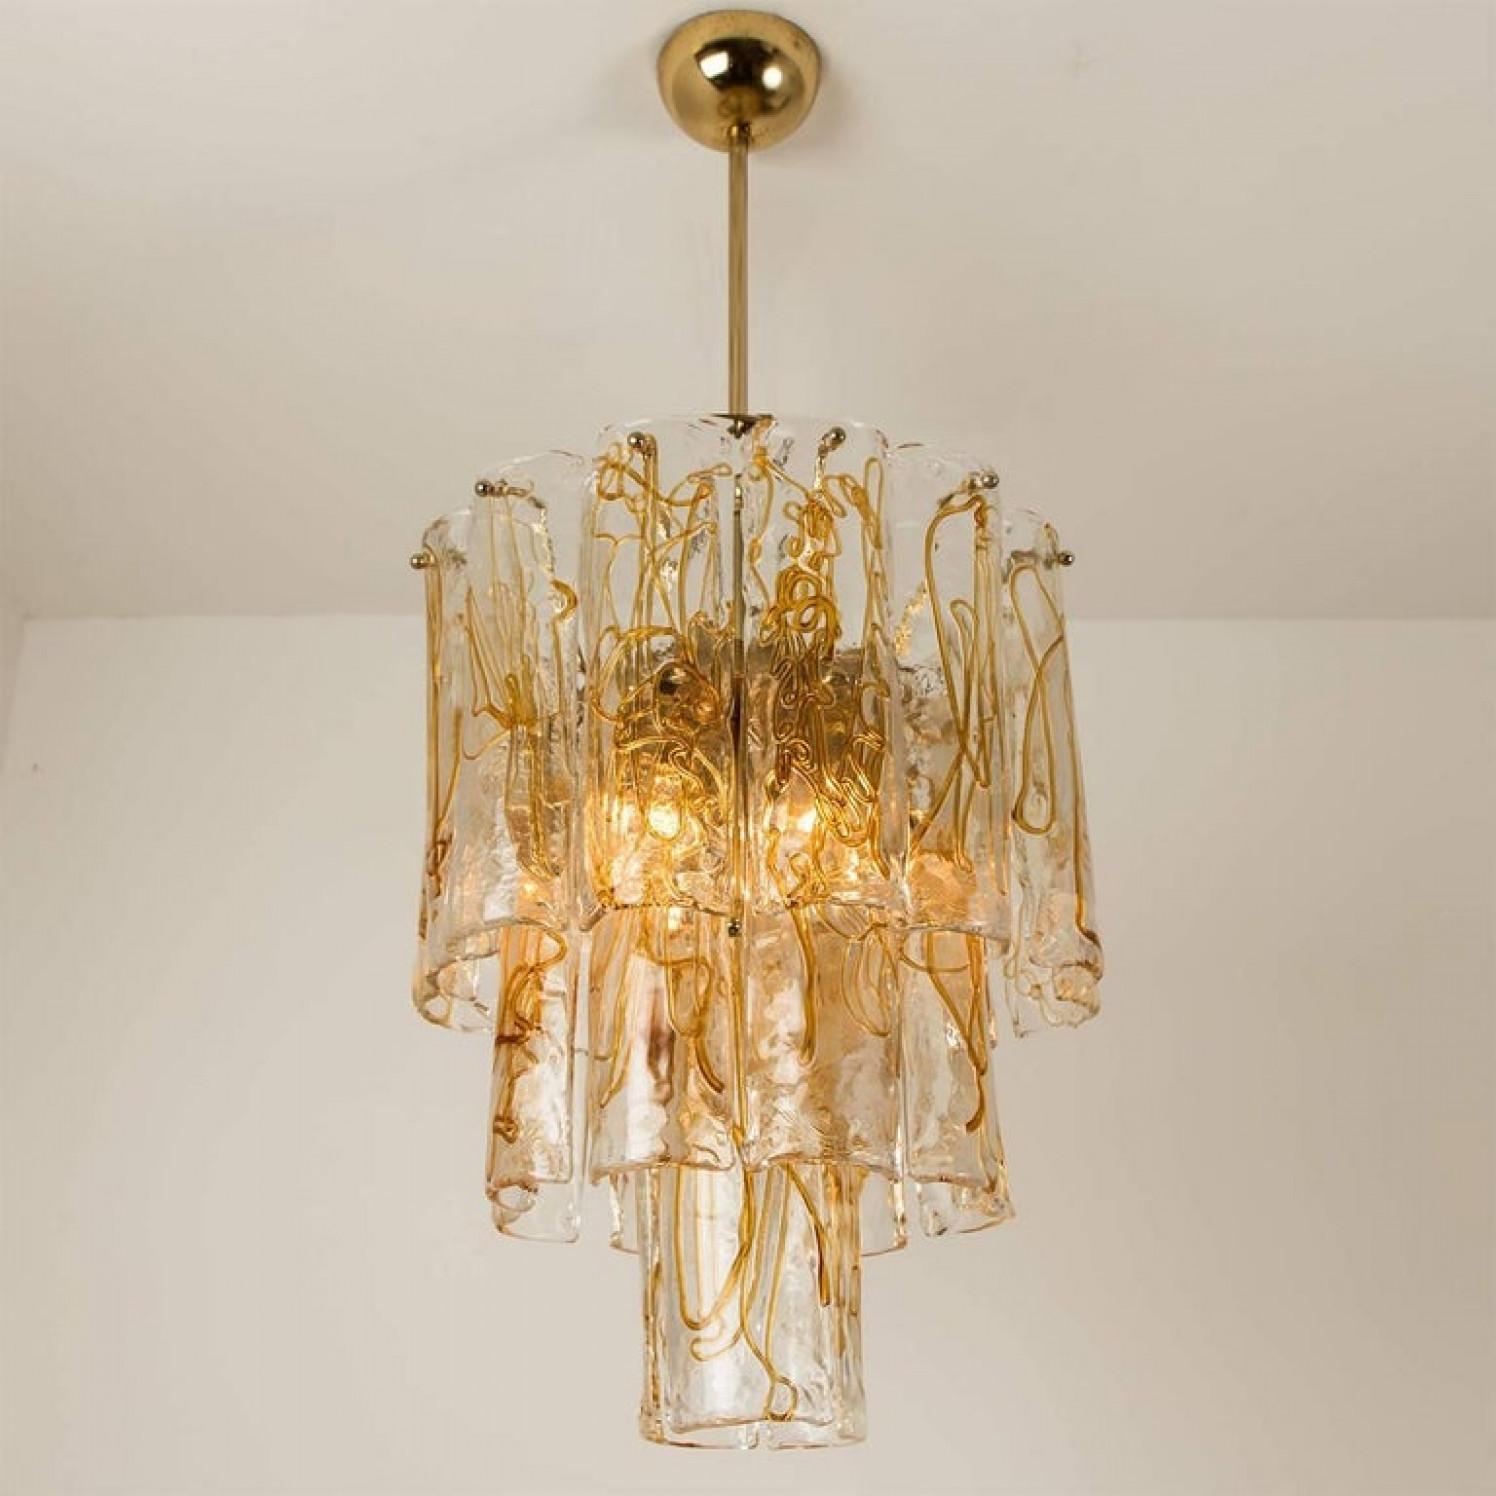 A stunning and high quality masterpiece chandelier by Doria, 1970. It features Murano 23 blown art glass prisms on a brass structure.
The prims refract light beautifully and are perfect for a soft, warm and welcoming glow in the room.

Measures: